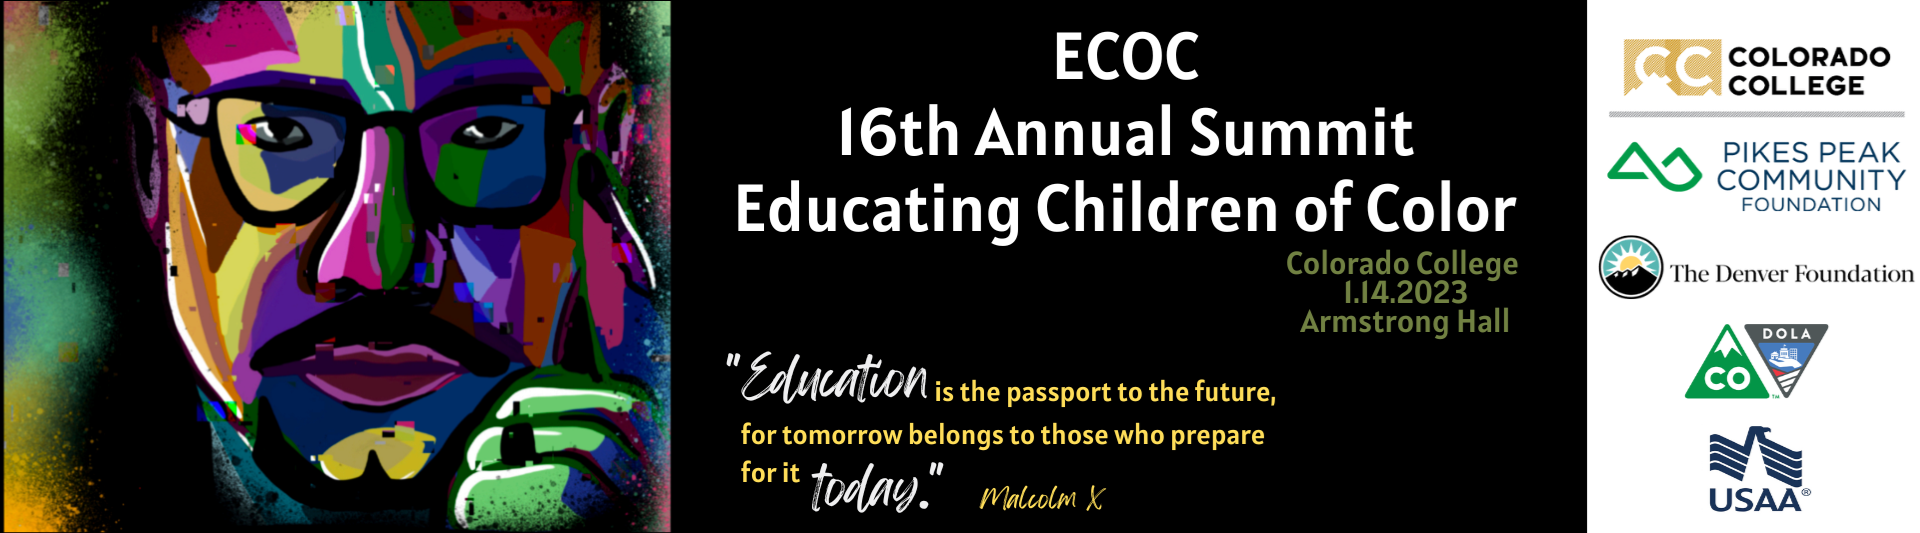 ECOC 2023 Annual Summit - Student Sessions